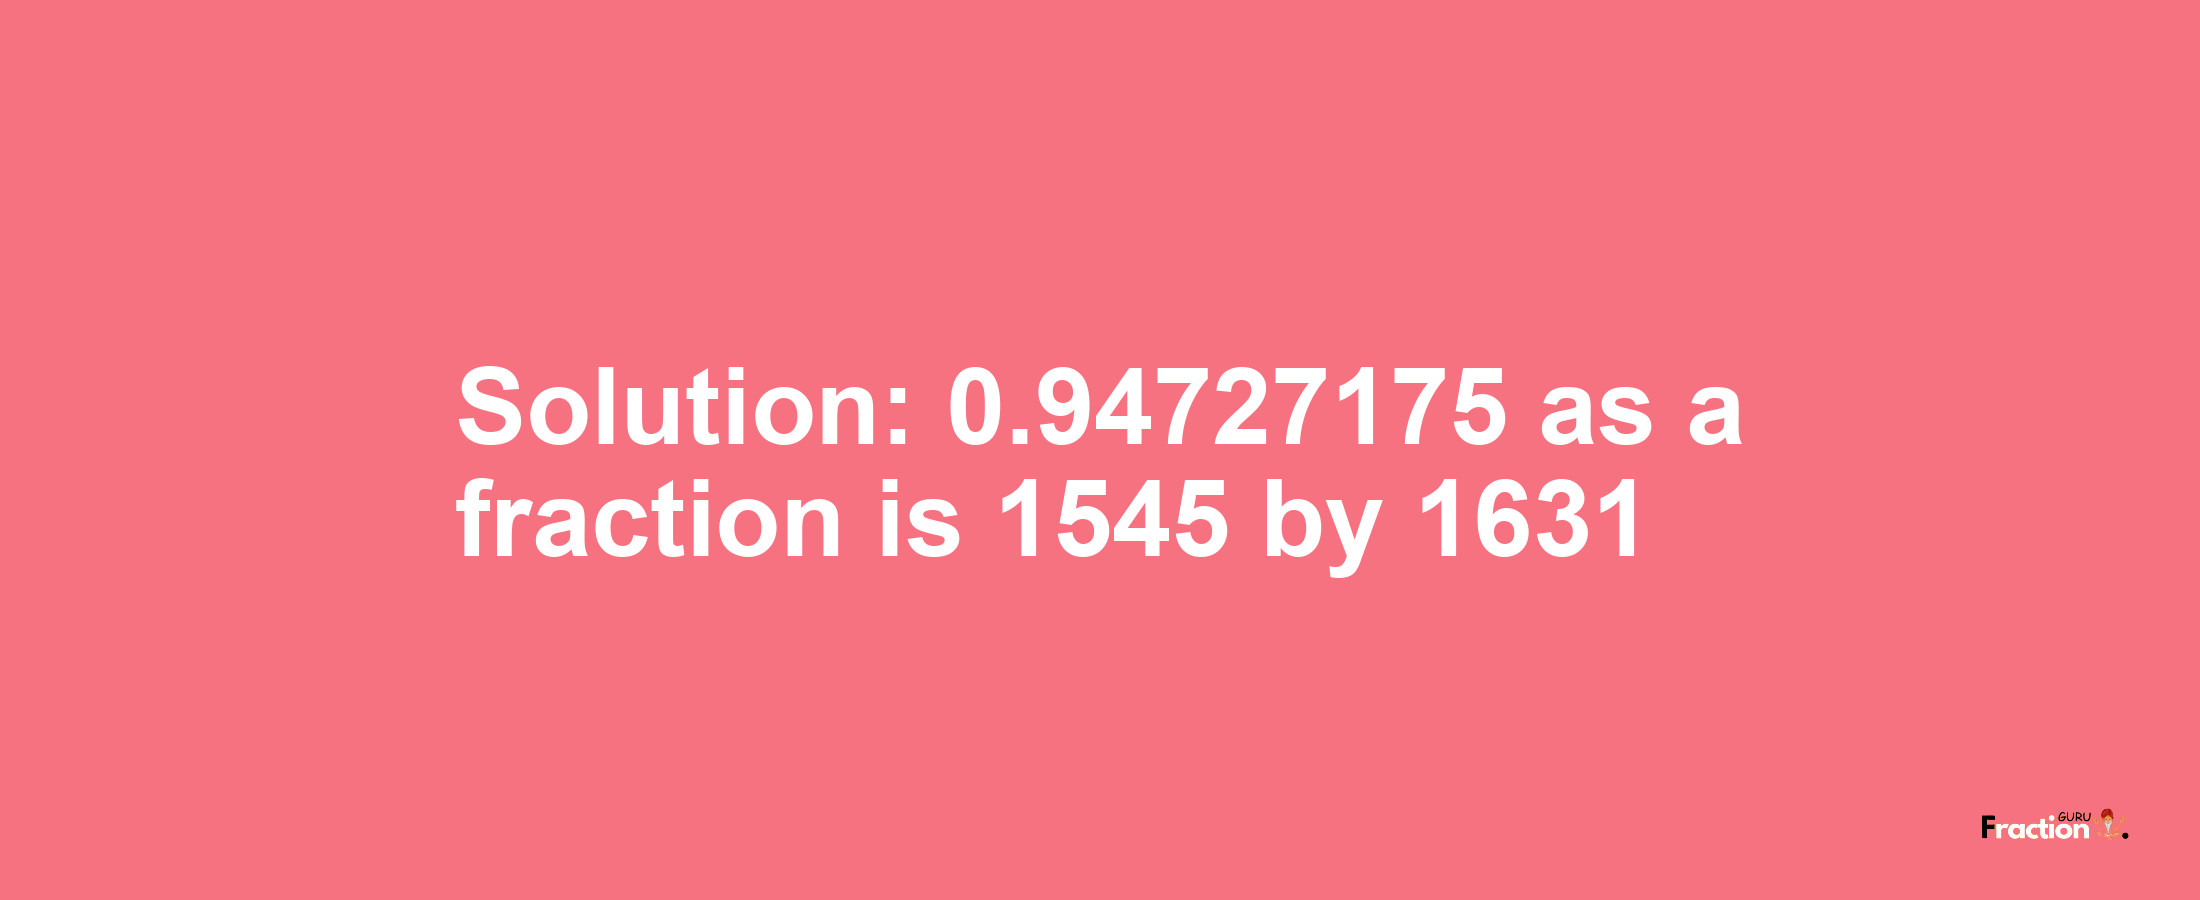 Solution:0.94727175 as a fraction is 1545/1631